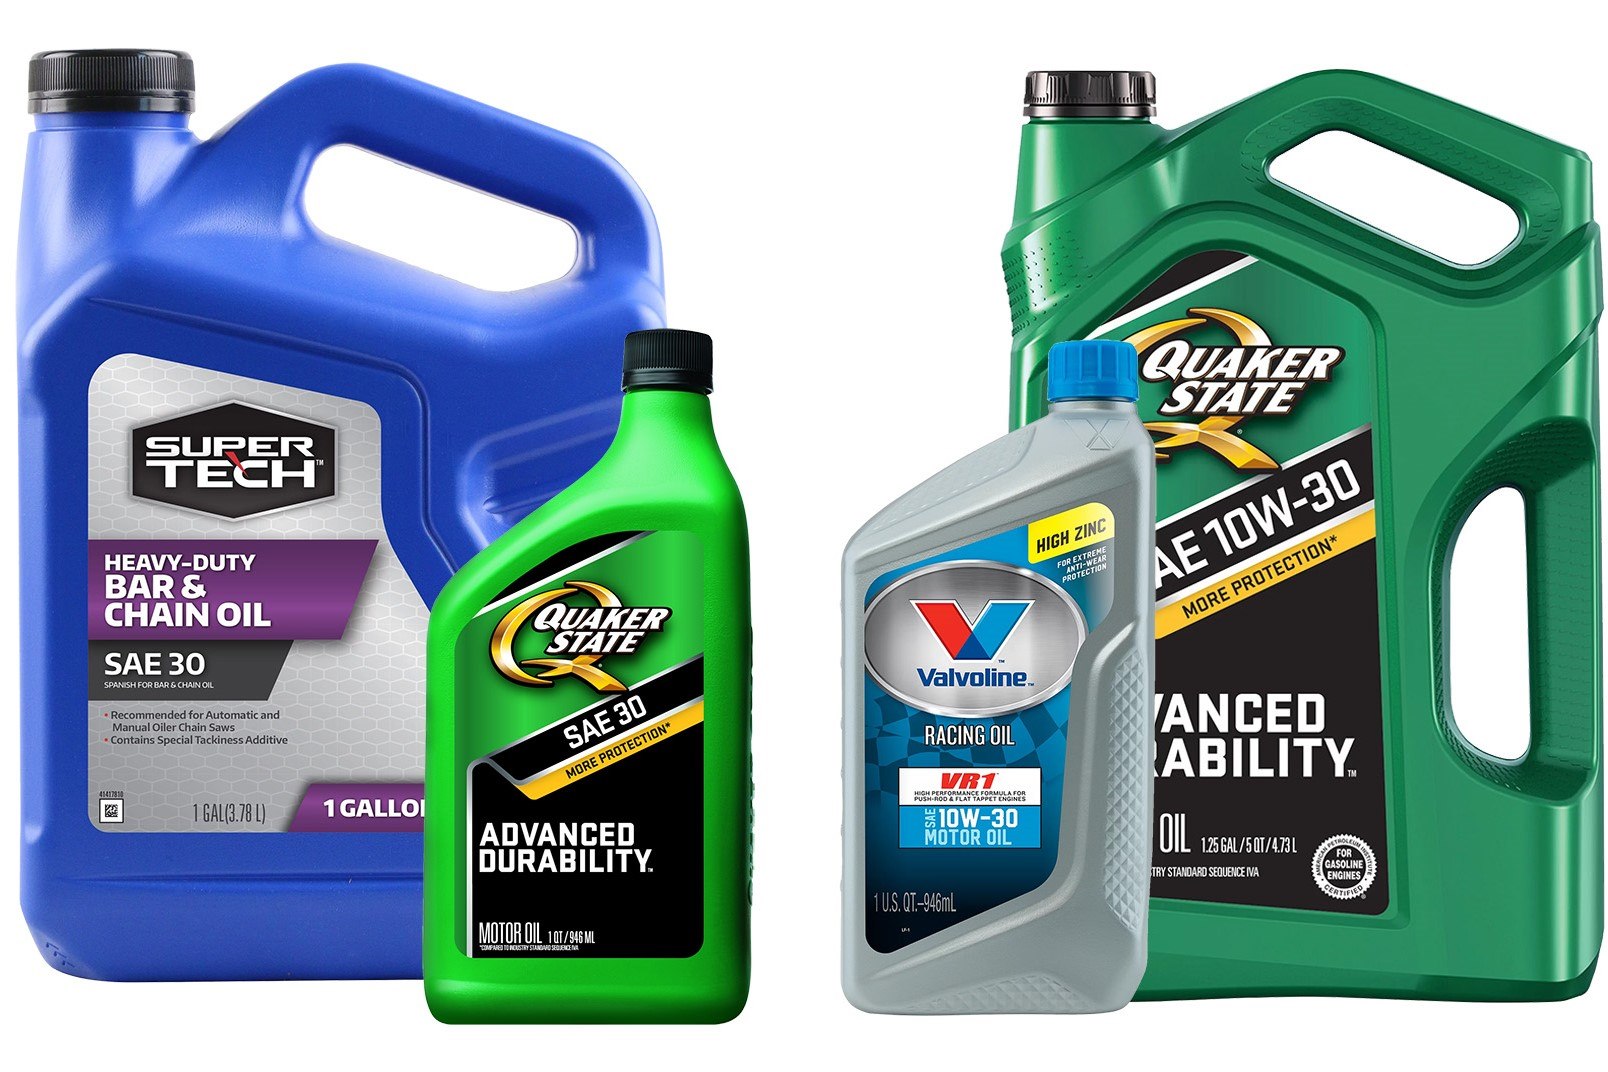 10W30 Vs SAE 30: Which Oil Is Better?